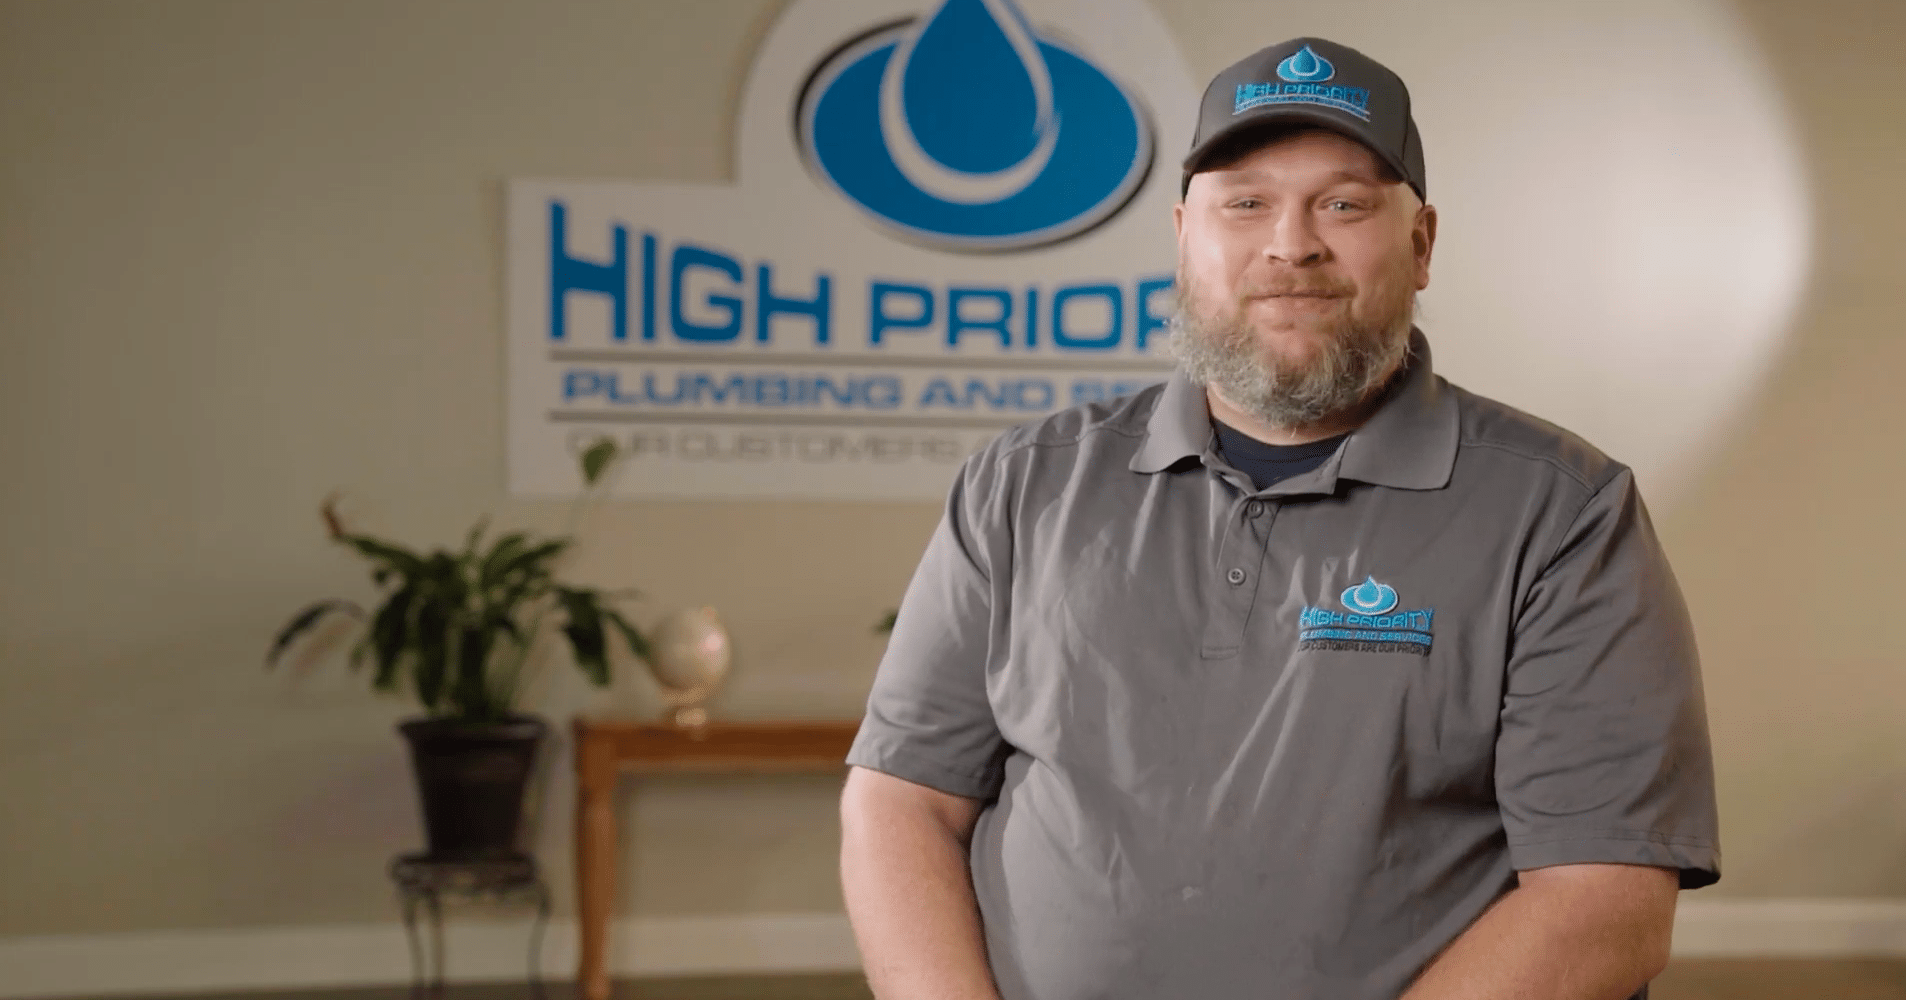 High Priority Plumbing And Services - Team Member